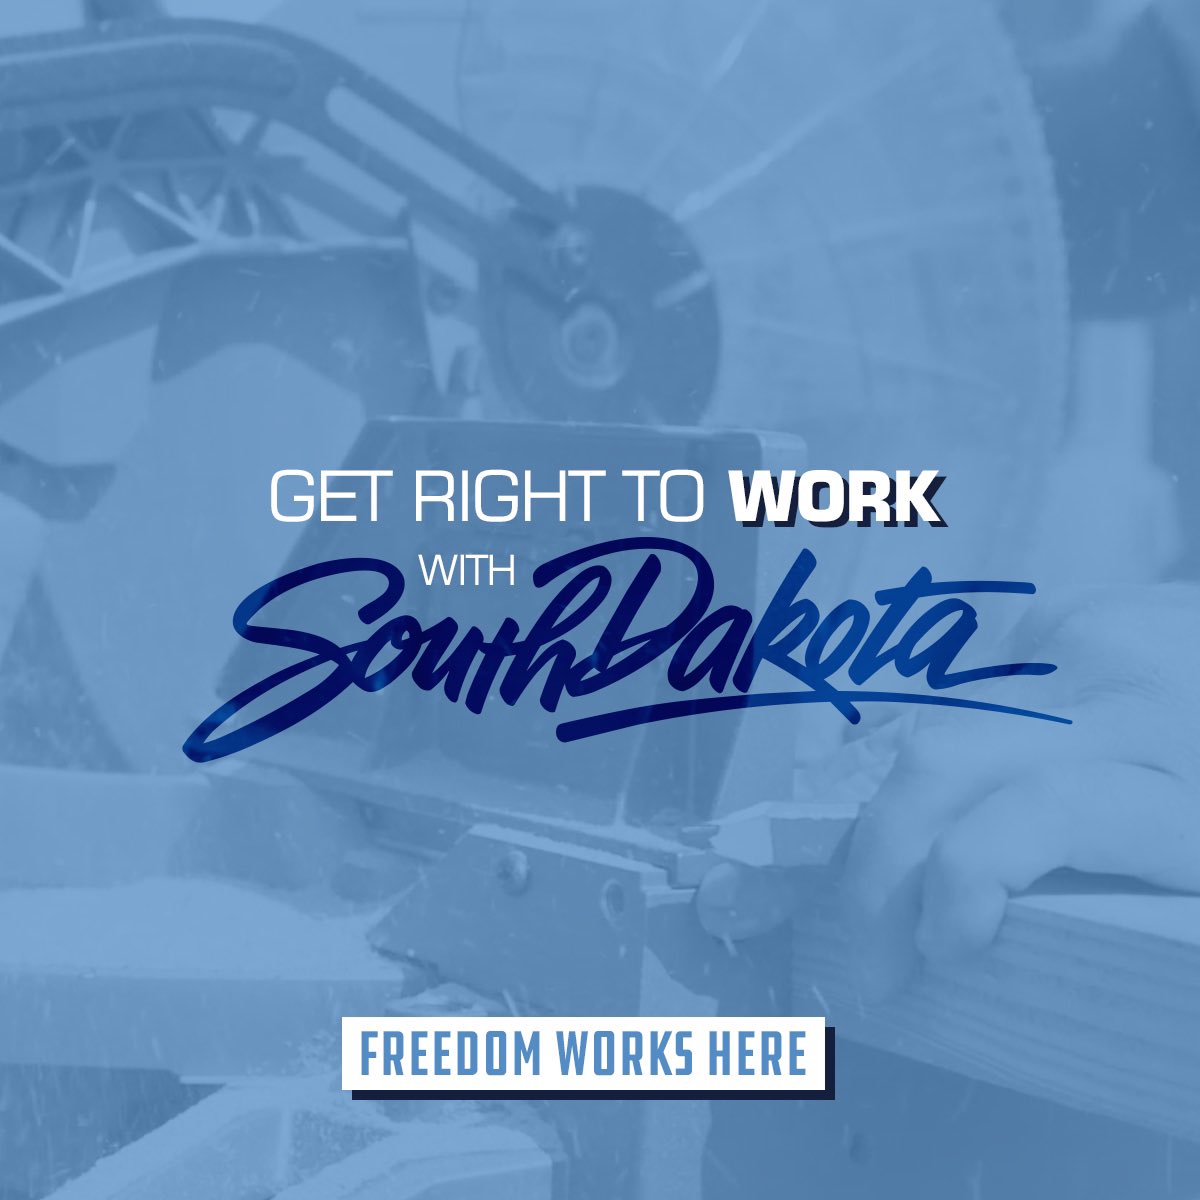 South Dakota has no income tax and apprenticeship training, so you’ll be on the job in no time. Join the freest workforce in the nation and see why Freedom works in South Dakota. FreedomWorksHere.com